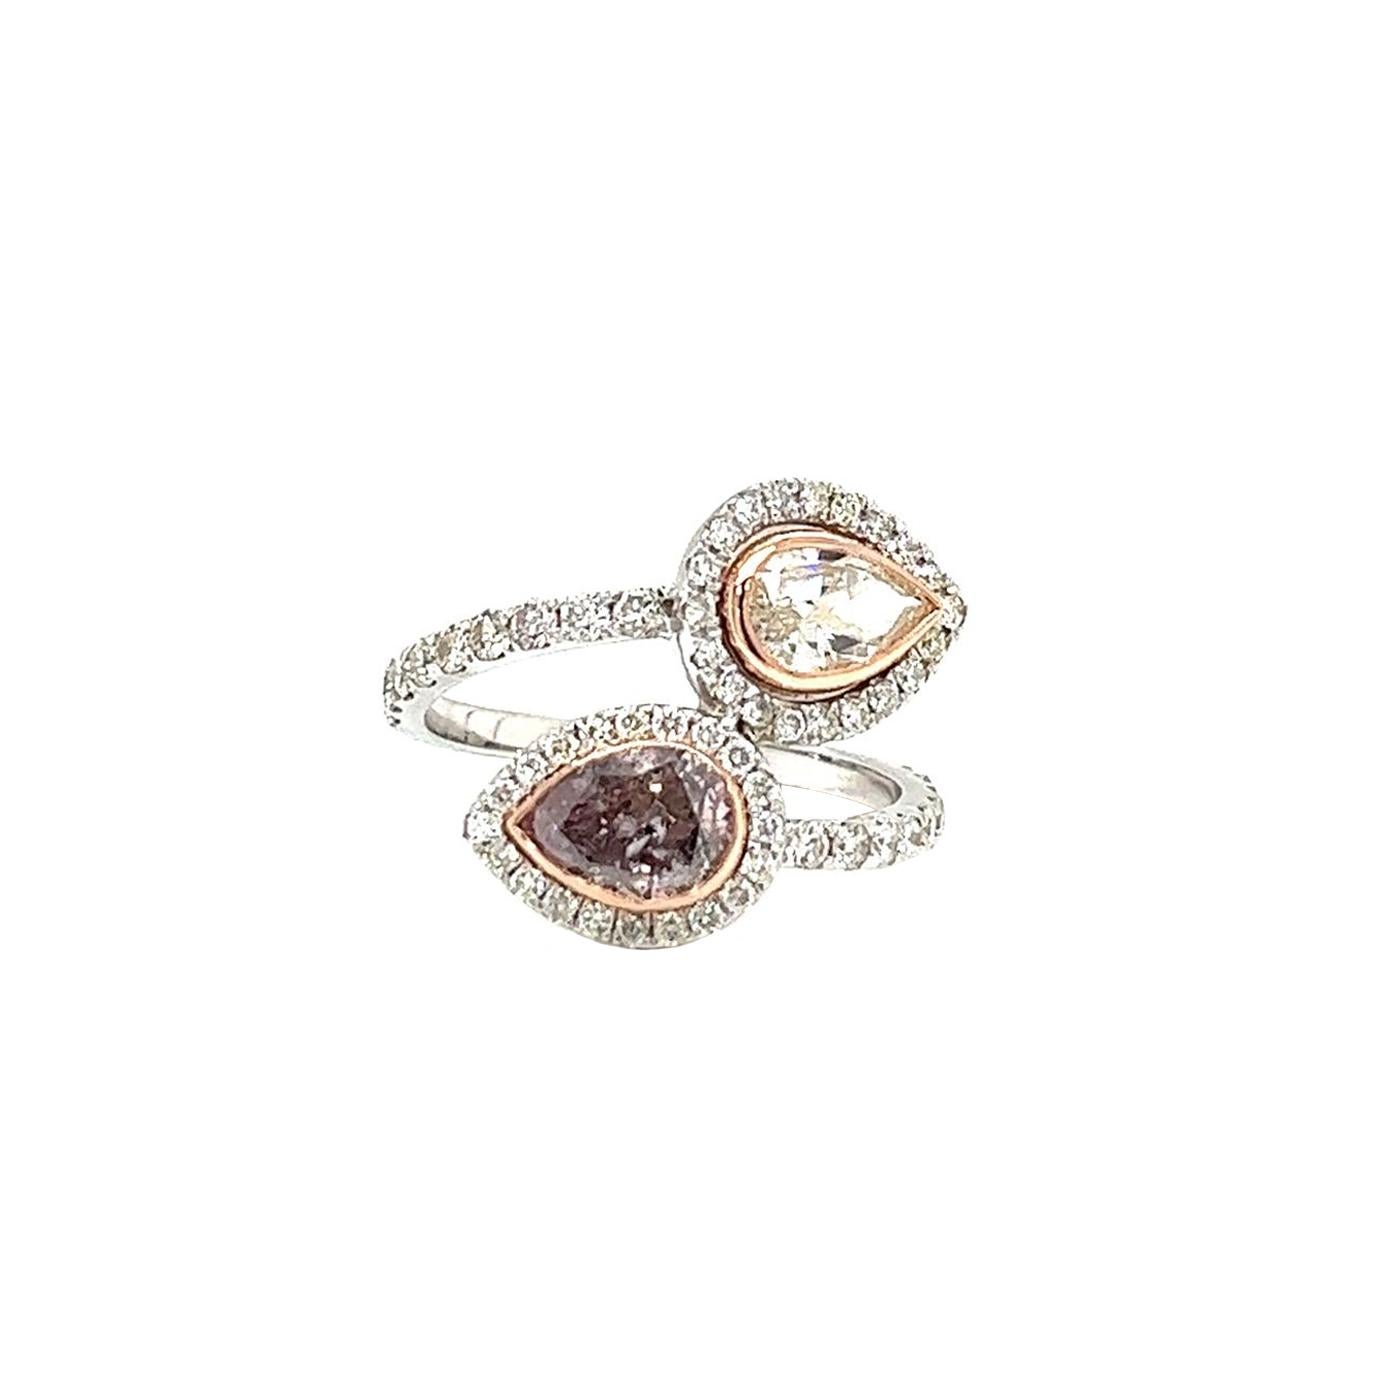 Modernist GIA 1.01ct Natural Fancy Purpleish pink Diamond Ring w/1.01ct Pear Shape Diamond For Sale